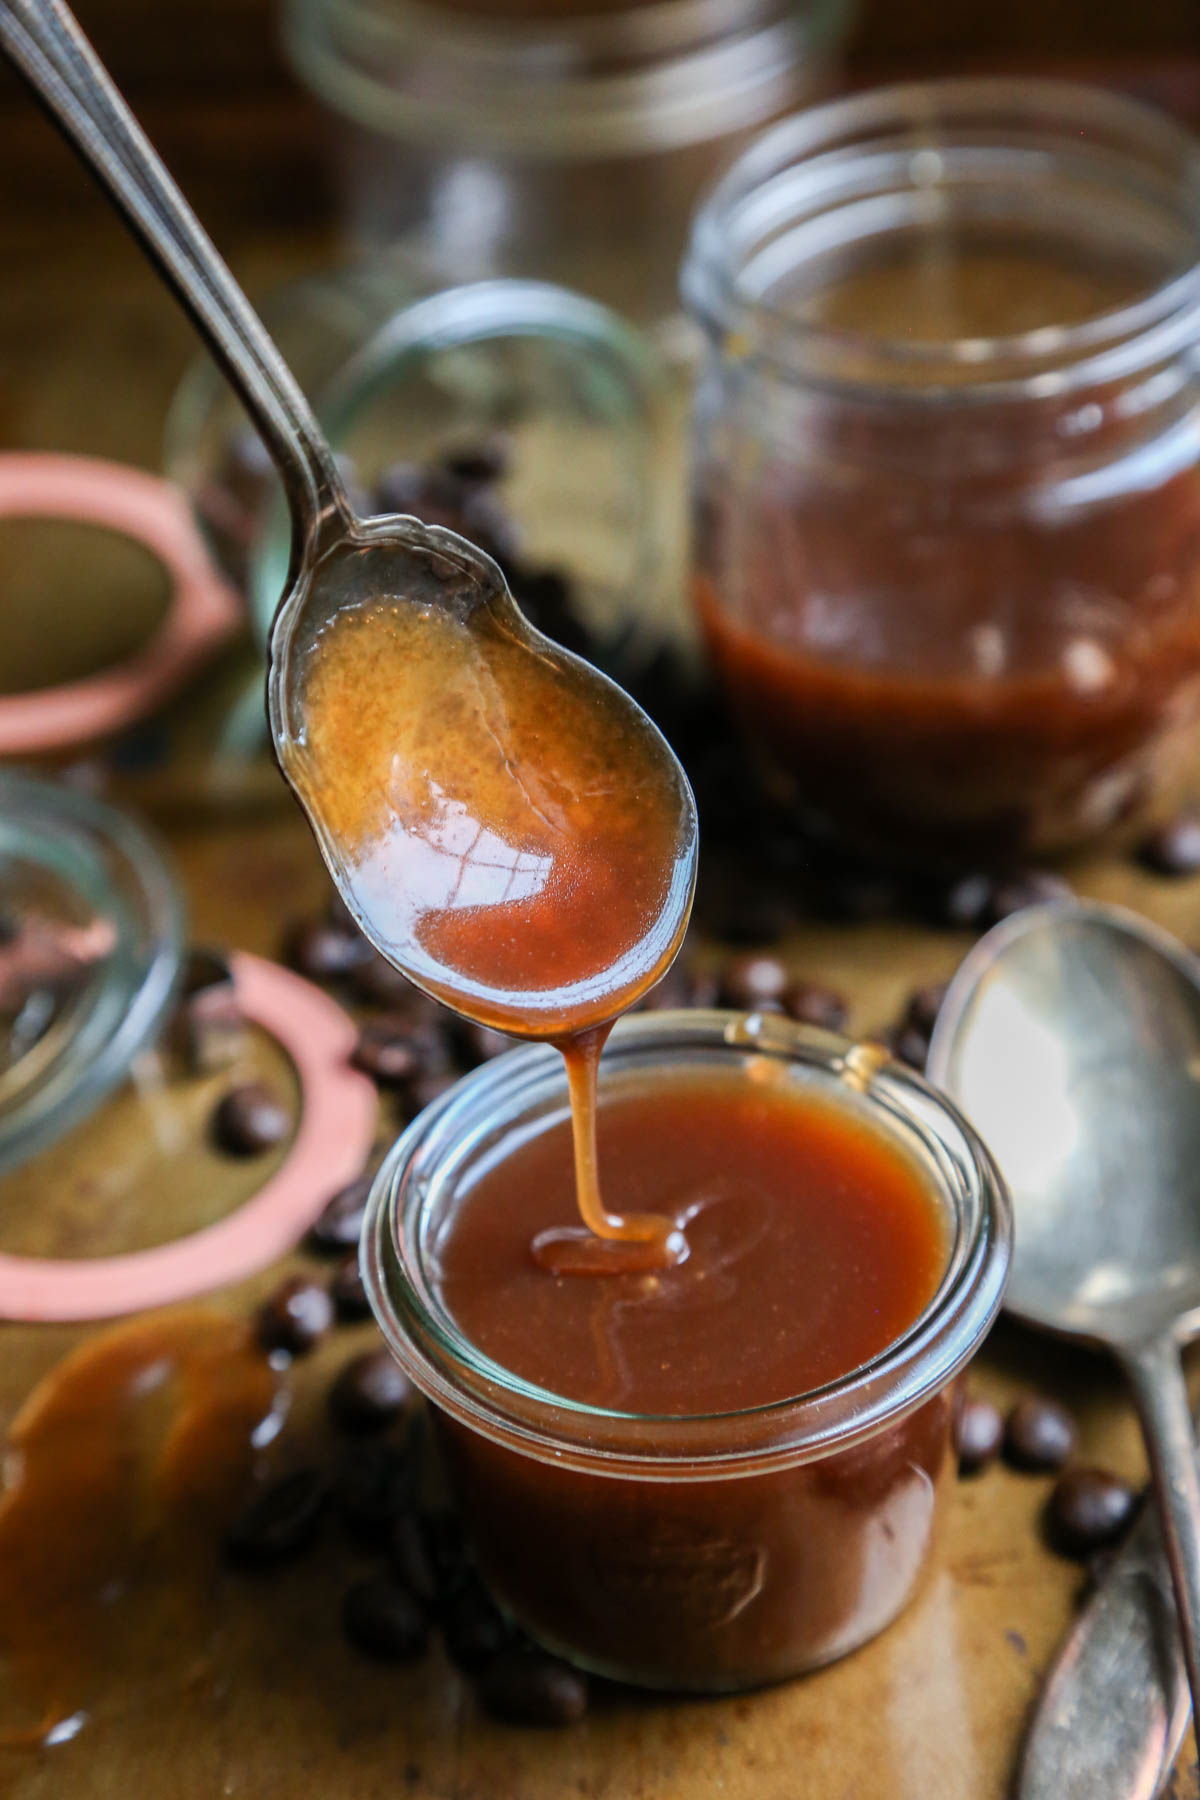 Homemade Coffee Salted Caramel Sauce - Perfect on ice cream or in your morning coffee! Keep a jar in the fridge for when the craving strikes!